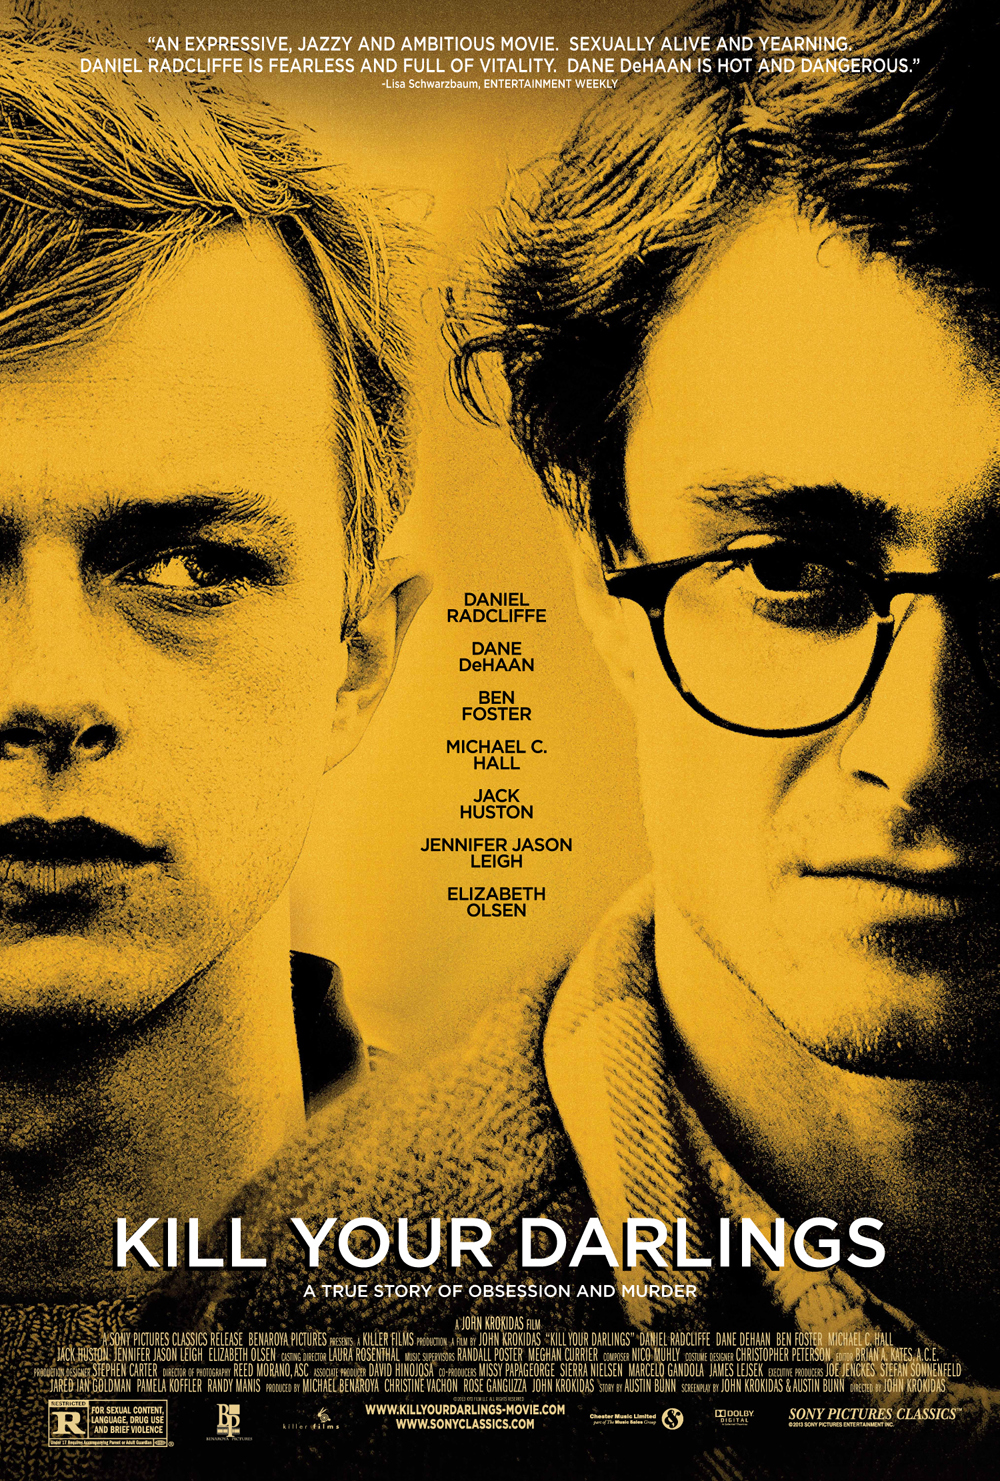 KILL YOUR DARLINGS (2013) Movie Trailer: Radcliffe is Allen Ginsberg